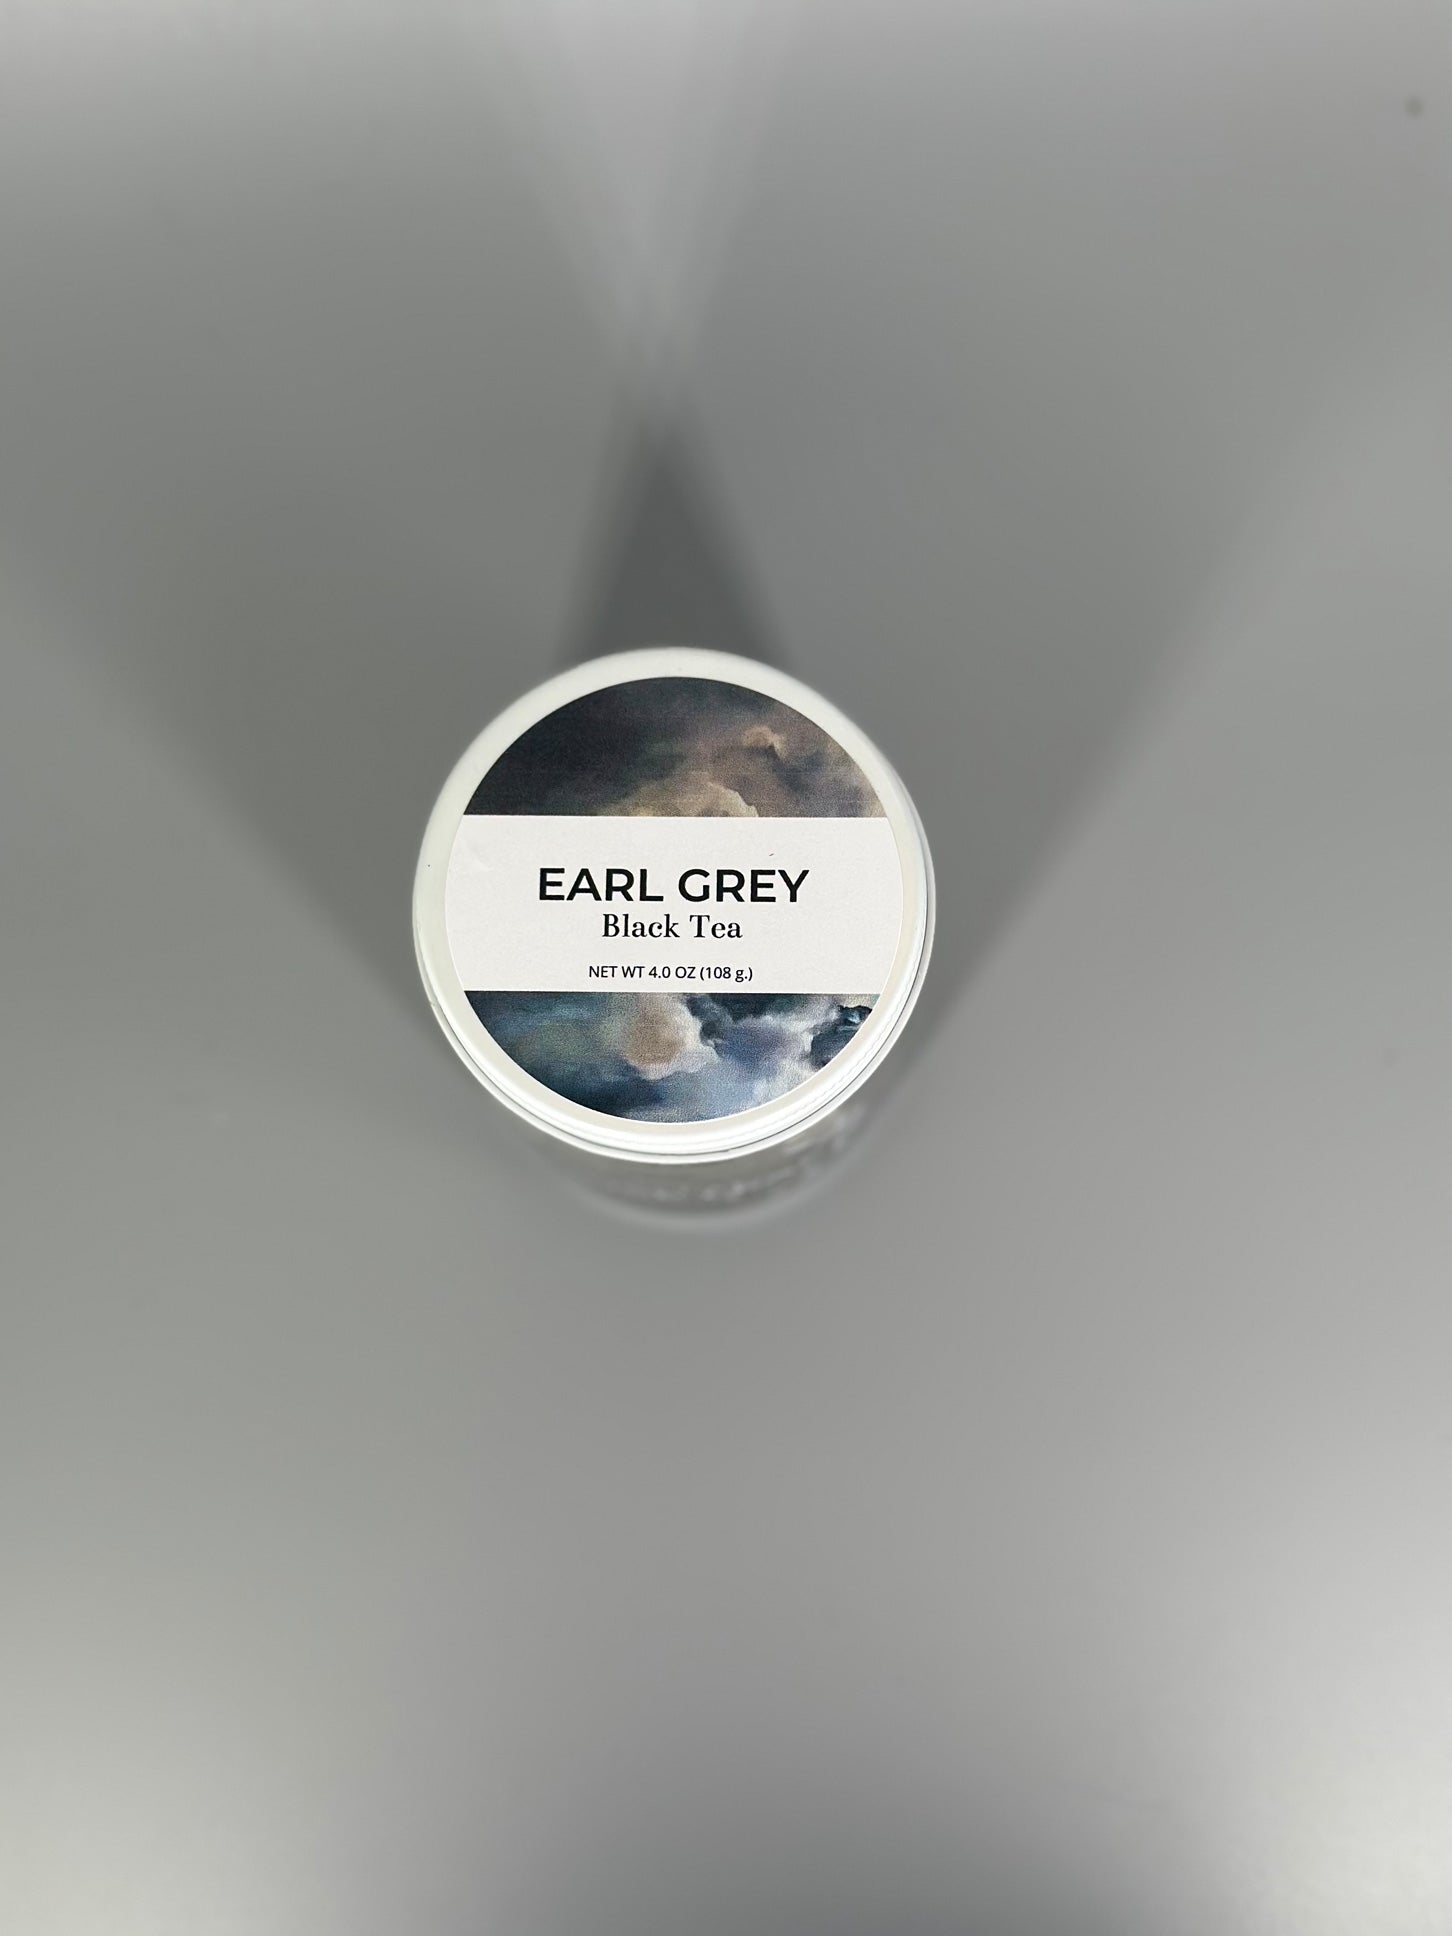 Chicory Tea Co.'s Earl Grey Black Tea in the jar, view from top